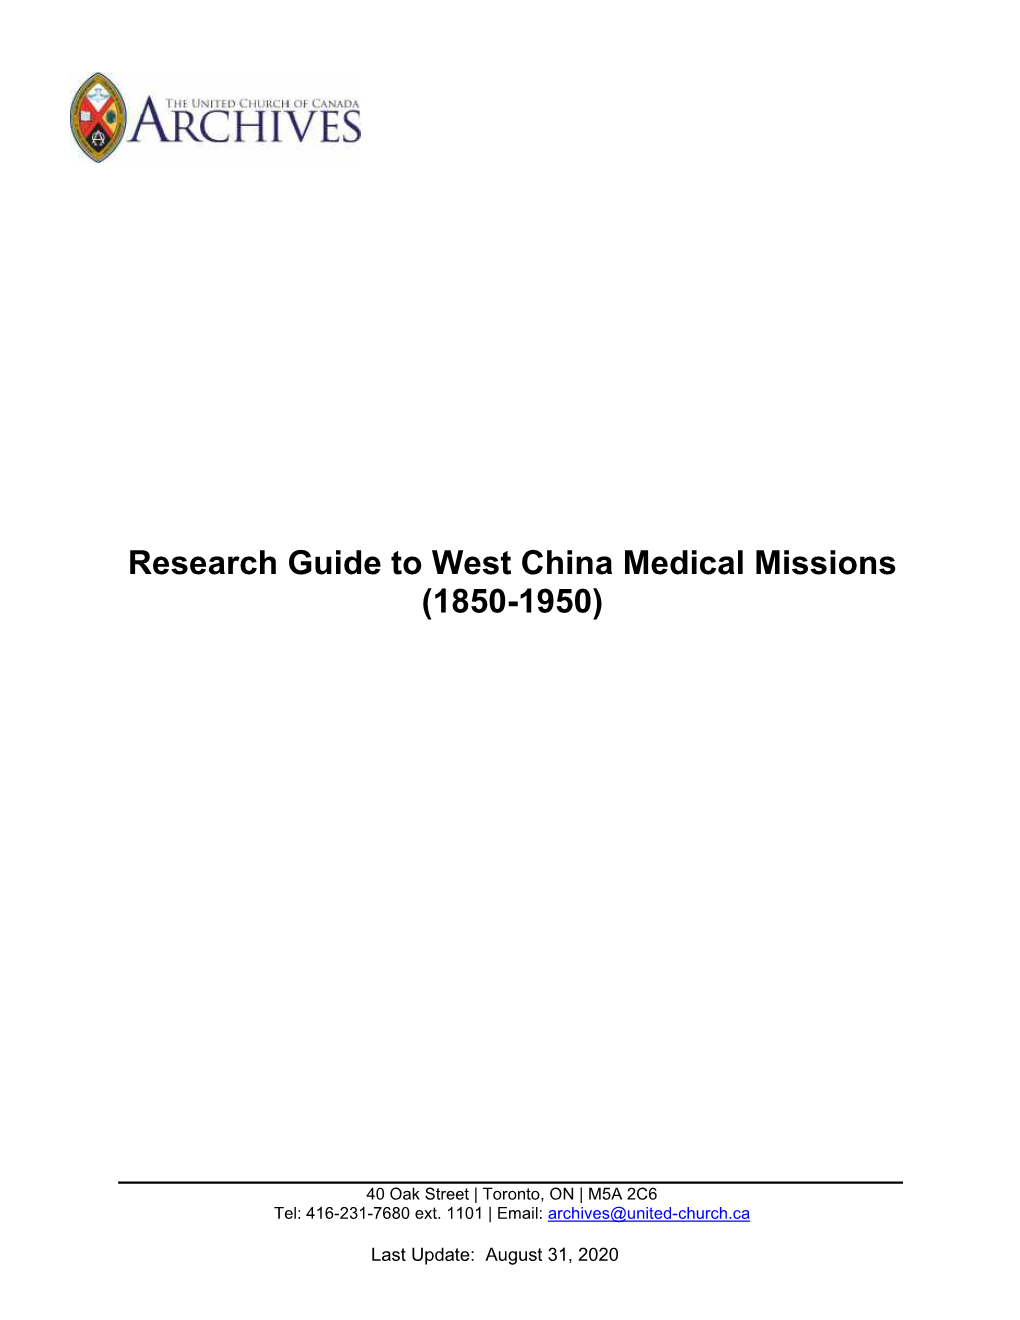 Research Guide to West China Medical Missions (1850-1950)